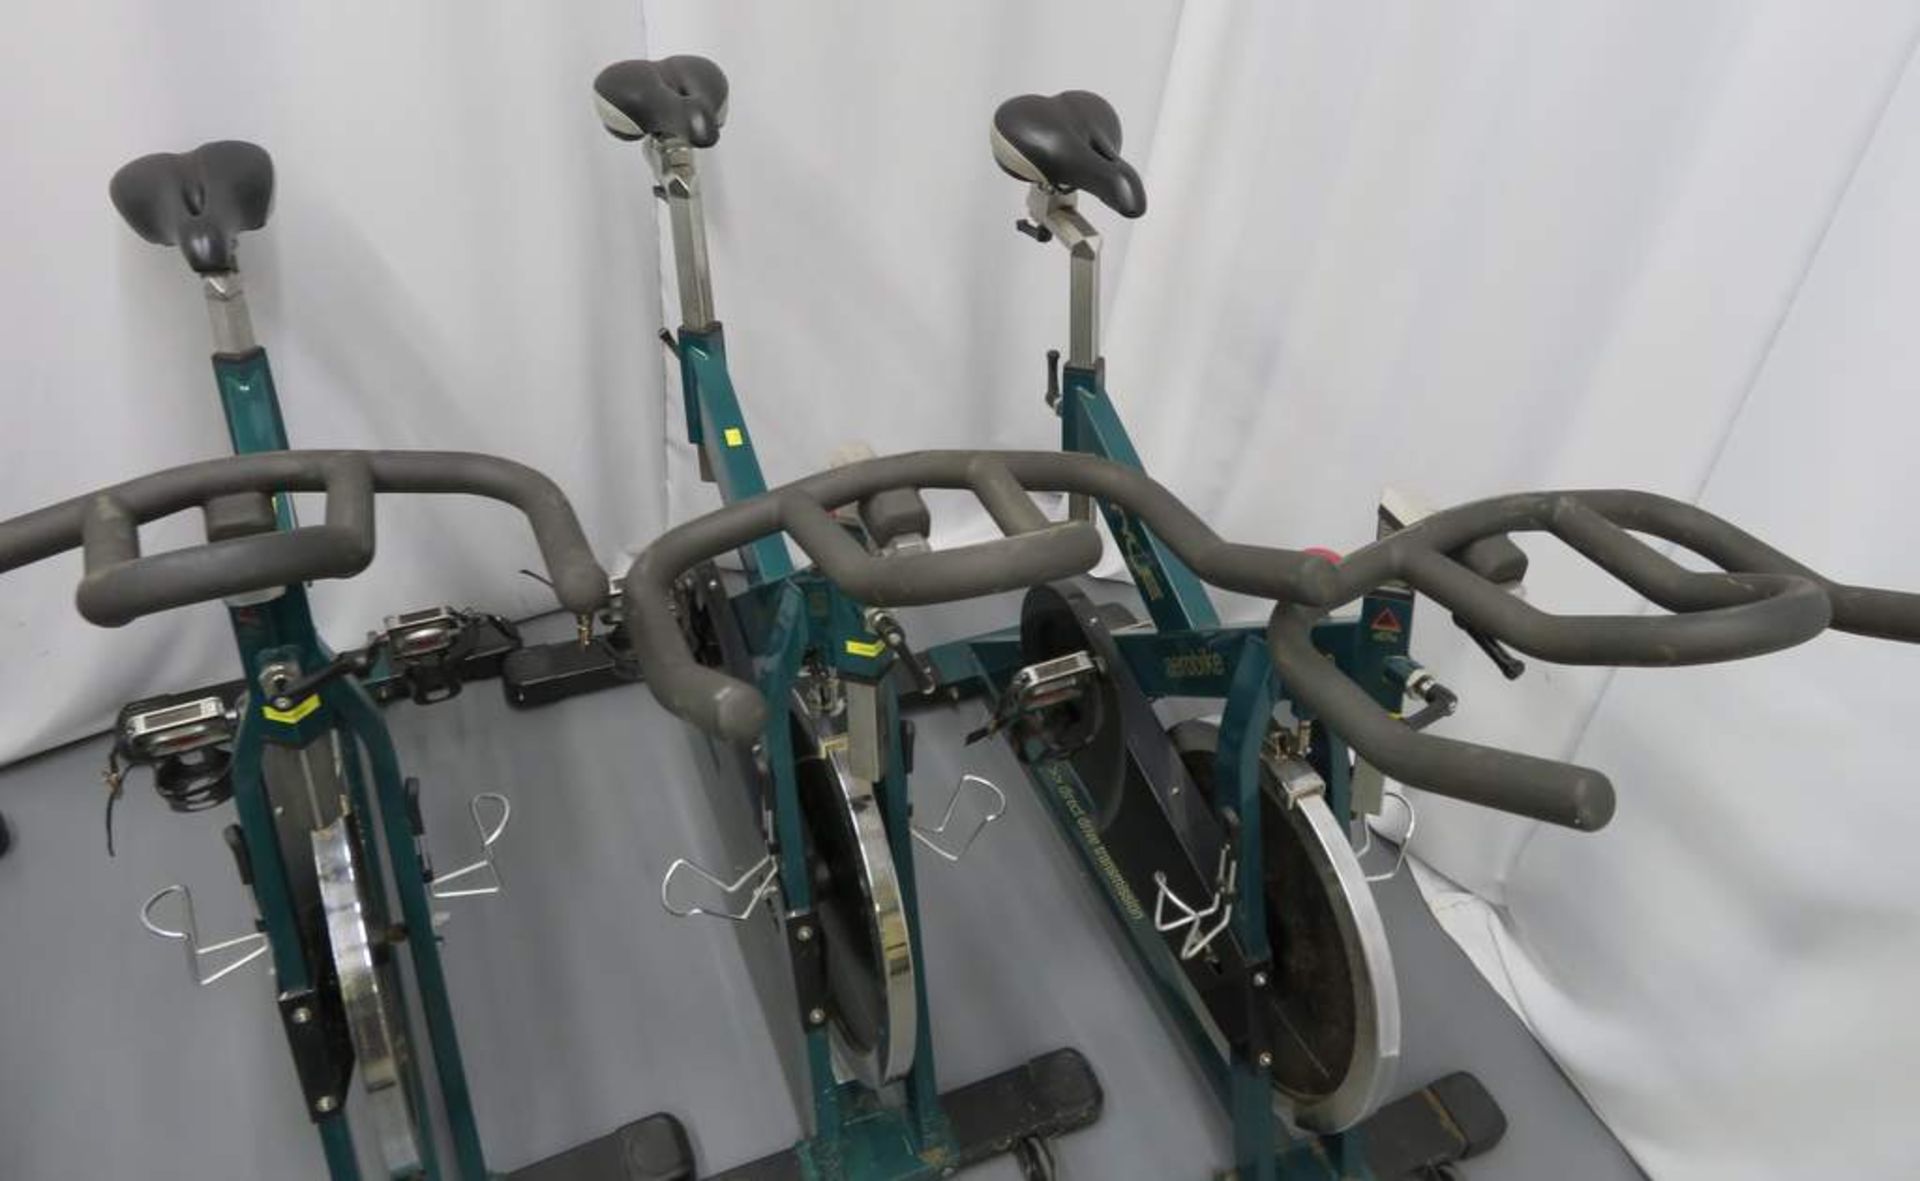 6x InStyle V850 Spin Bike - 1 Missing A Seat. - Image 5 of 9